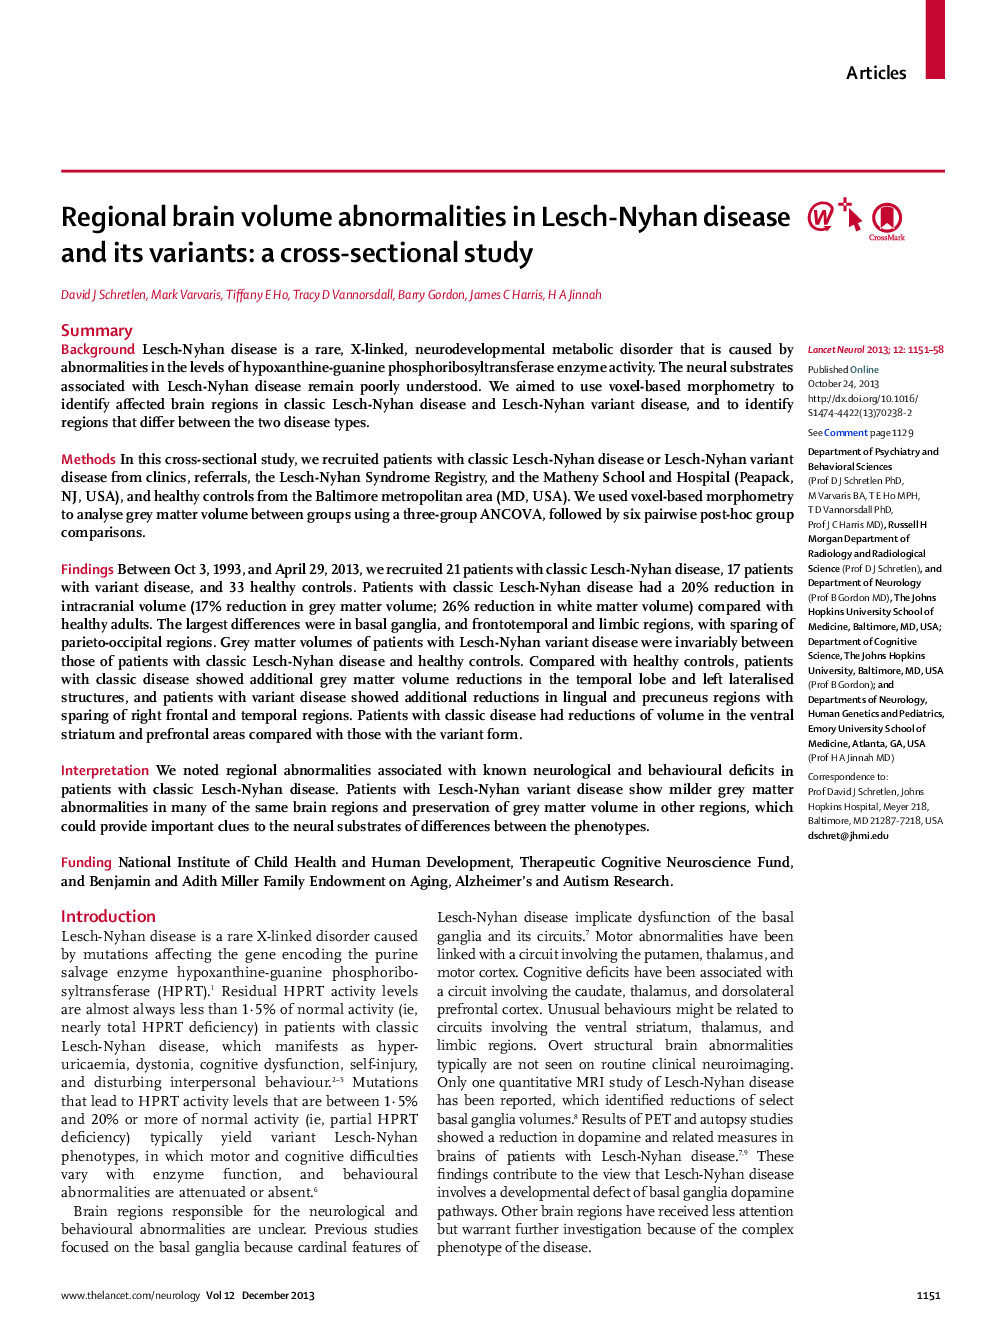 Regional brain volume abnormalities in Lesch-Nyhan disease and its variants: a cross-sectional study